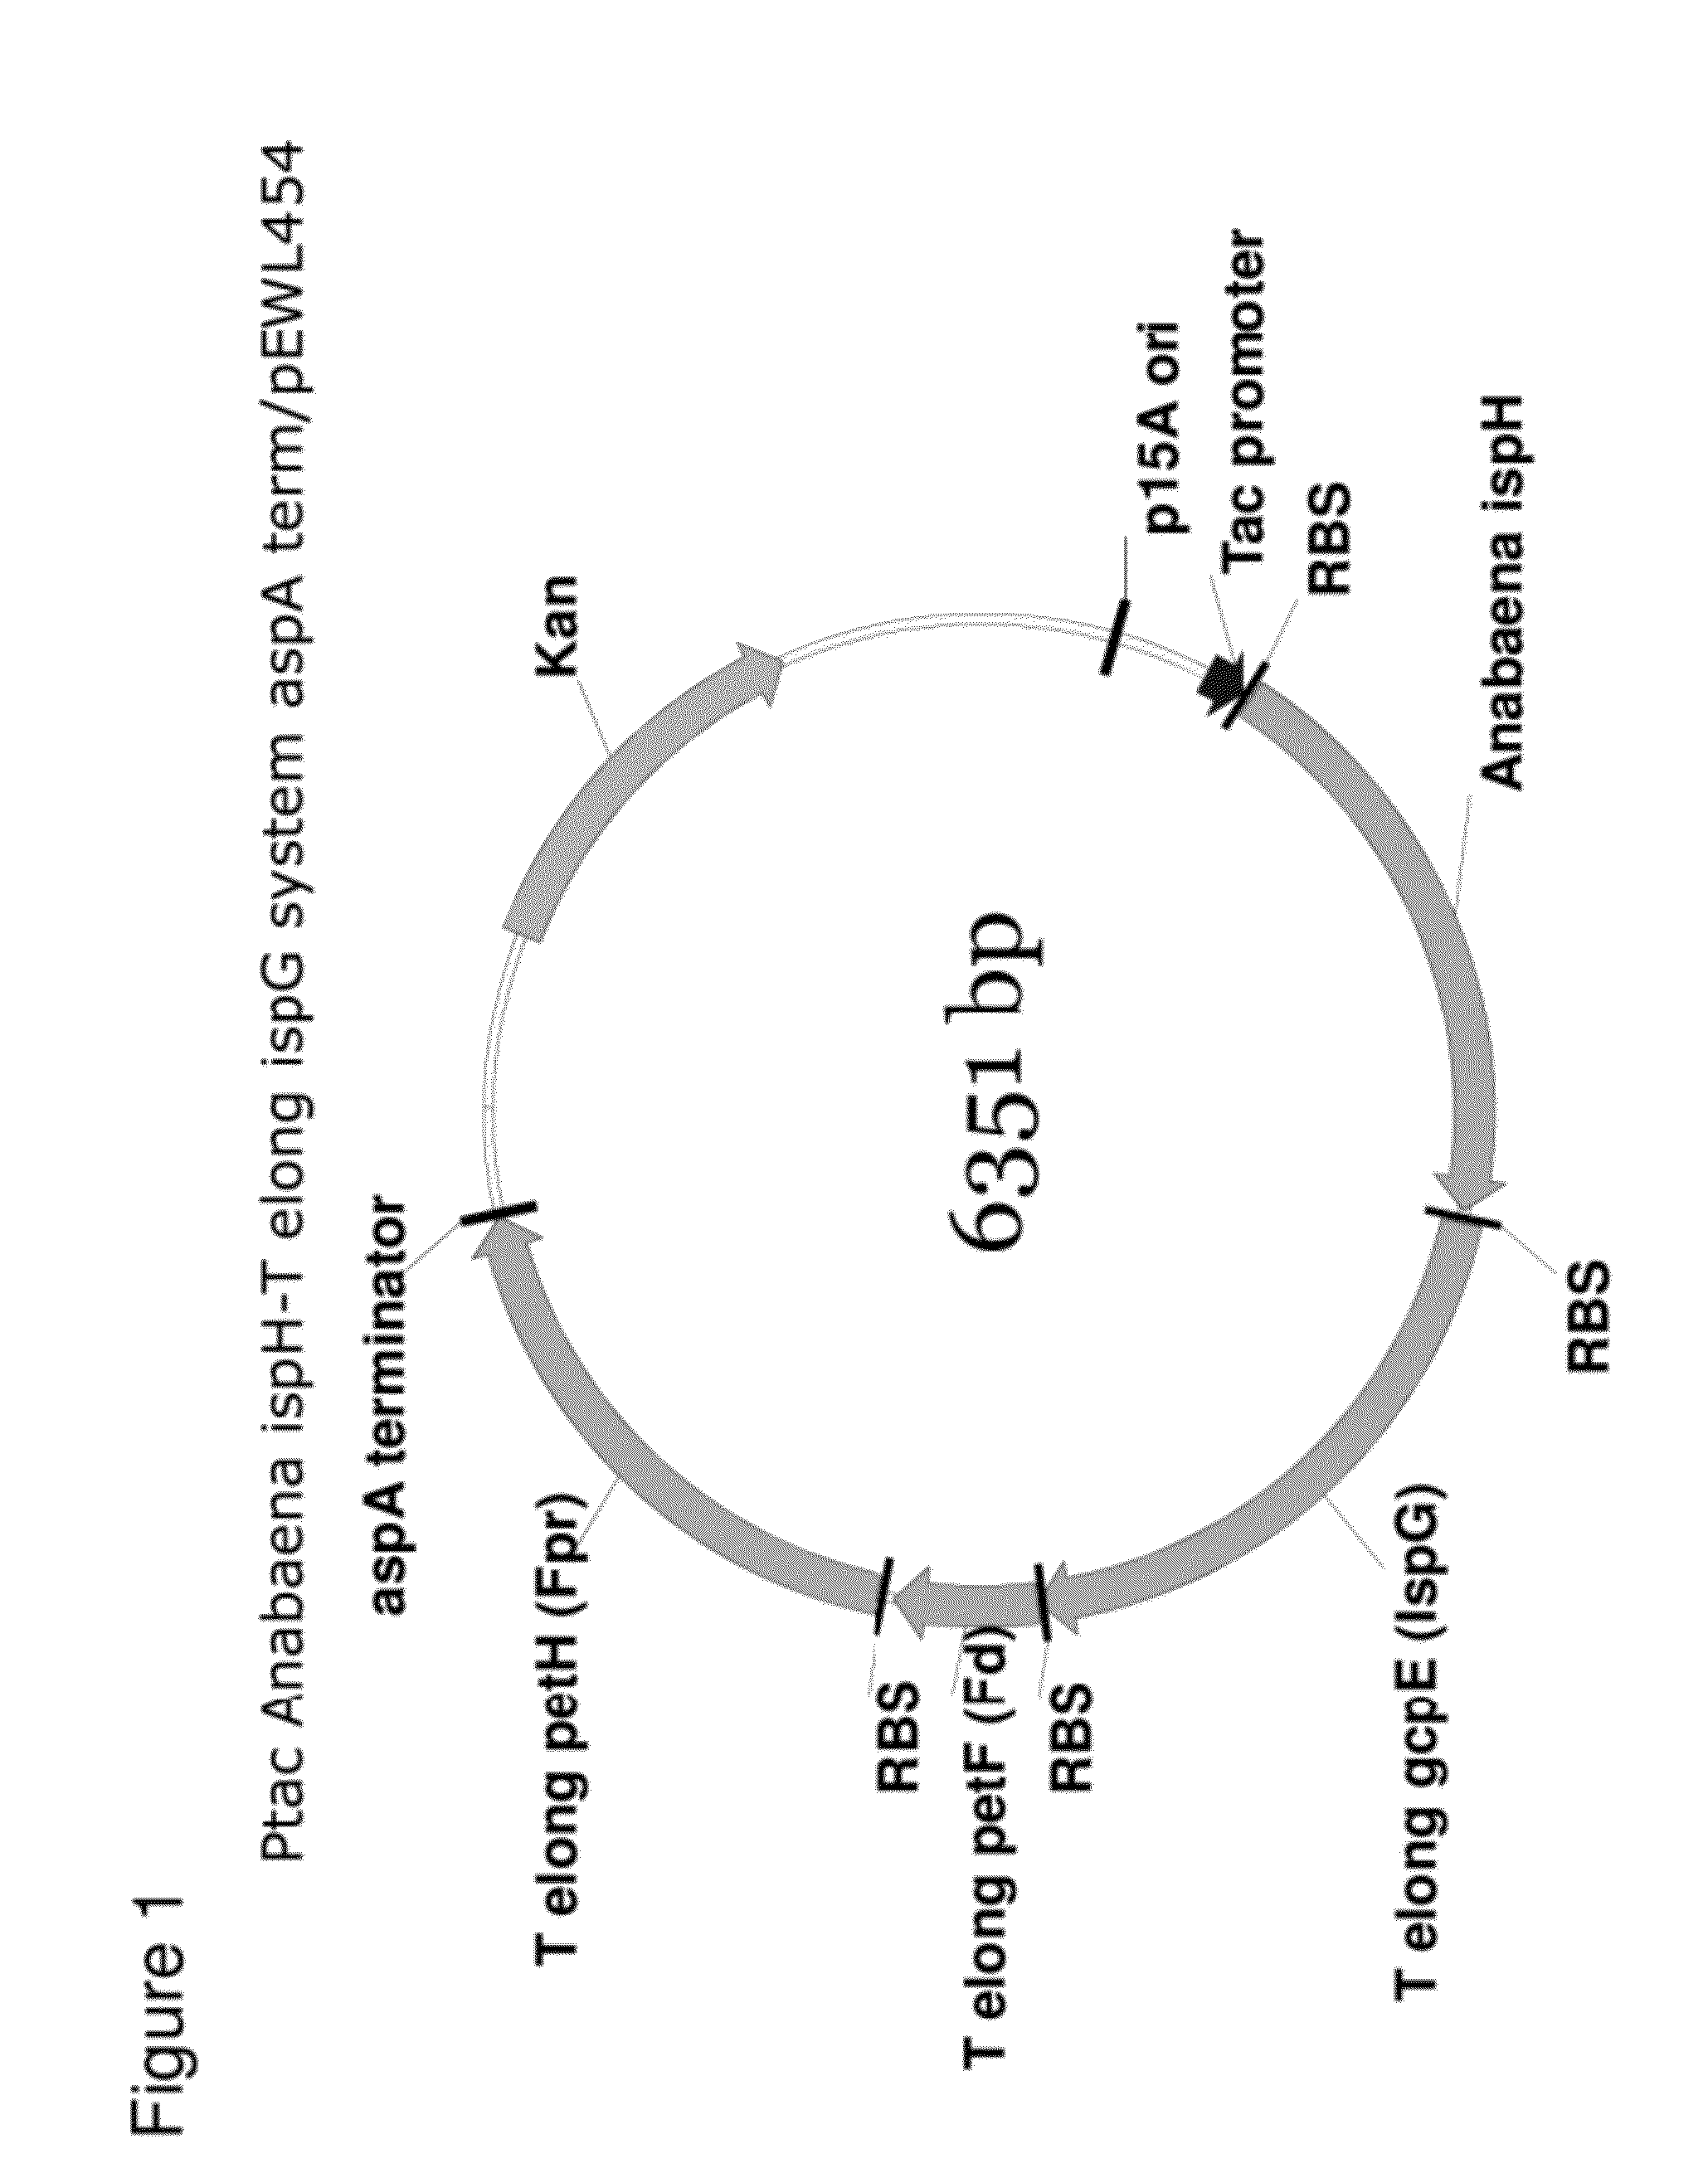 Compositions and methods for improved isoprene production using two types of ispg enzymes